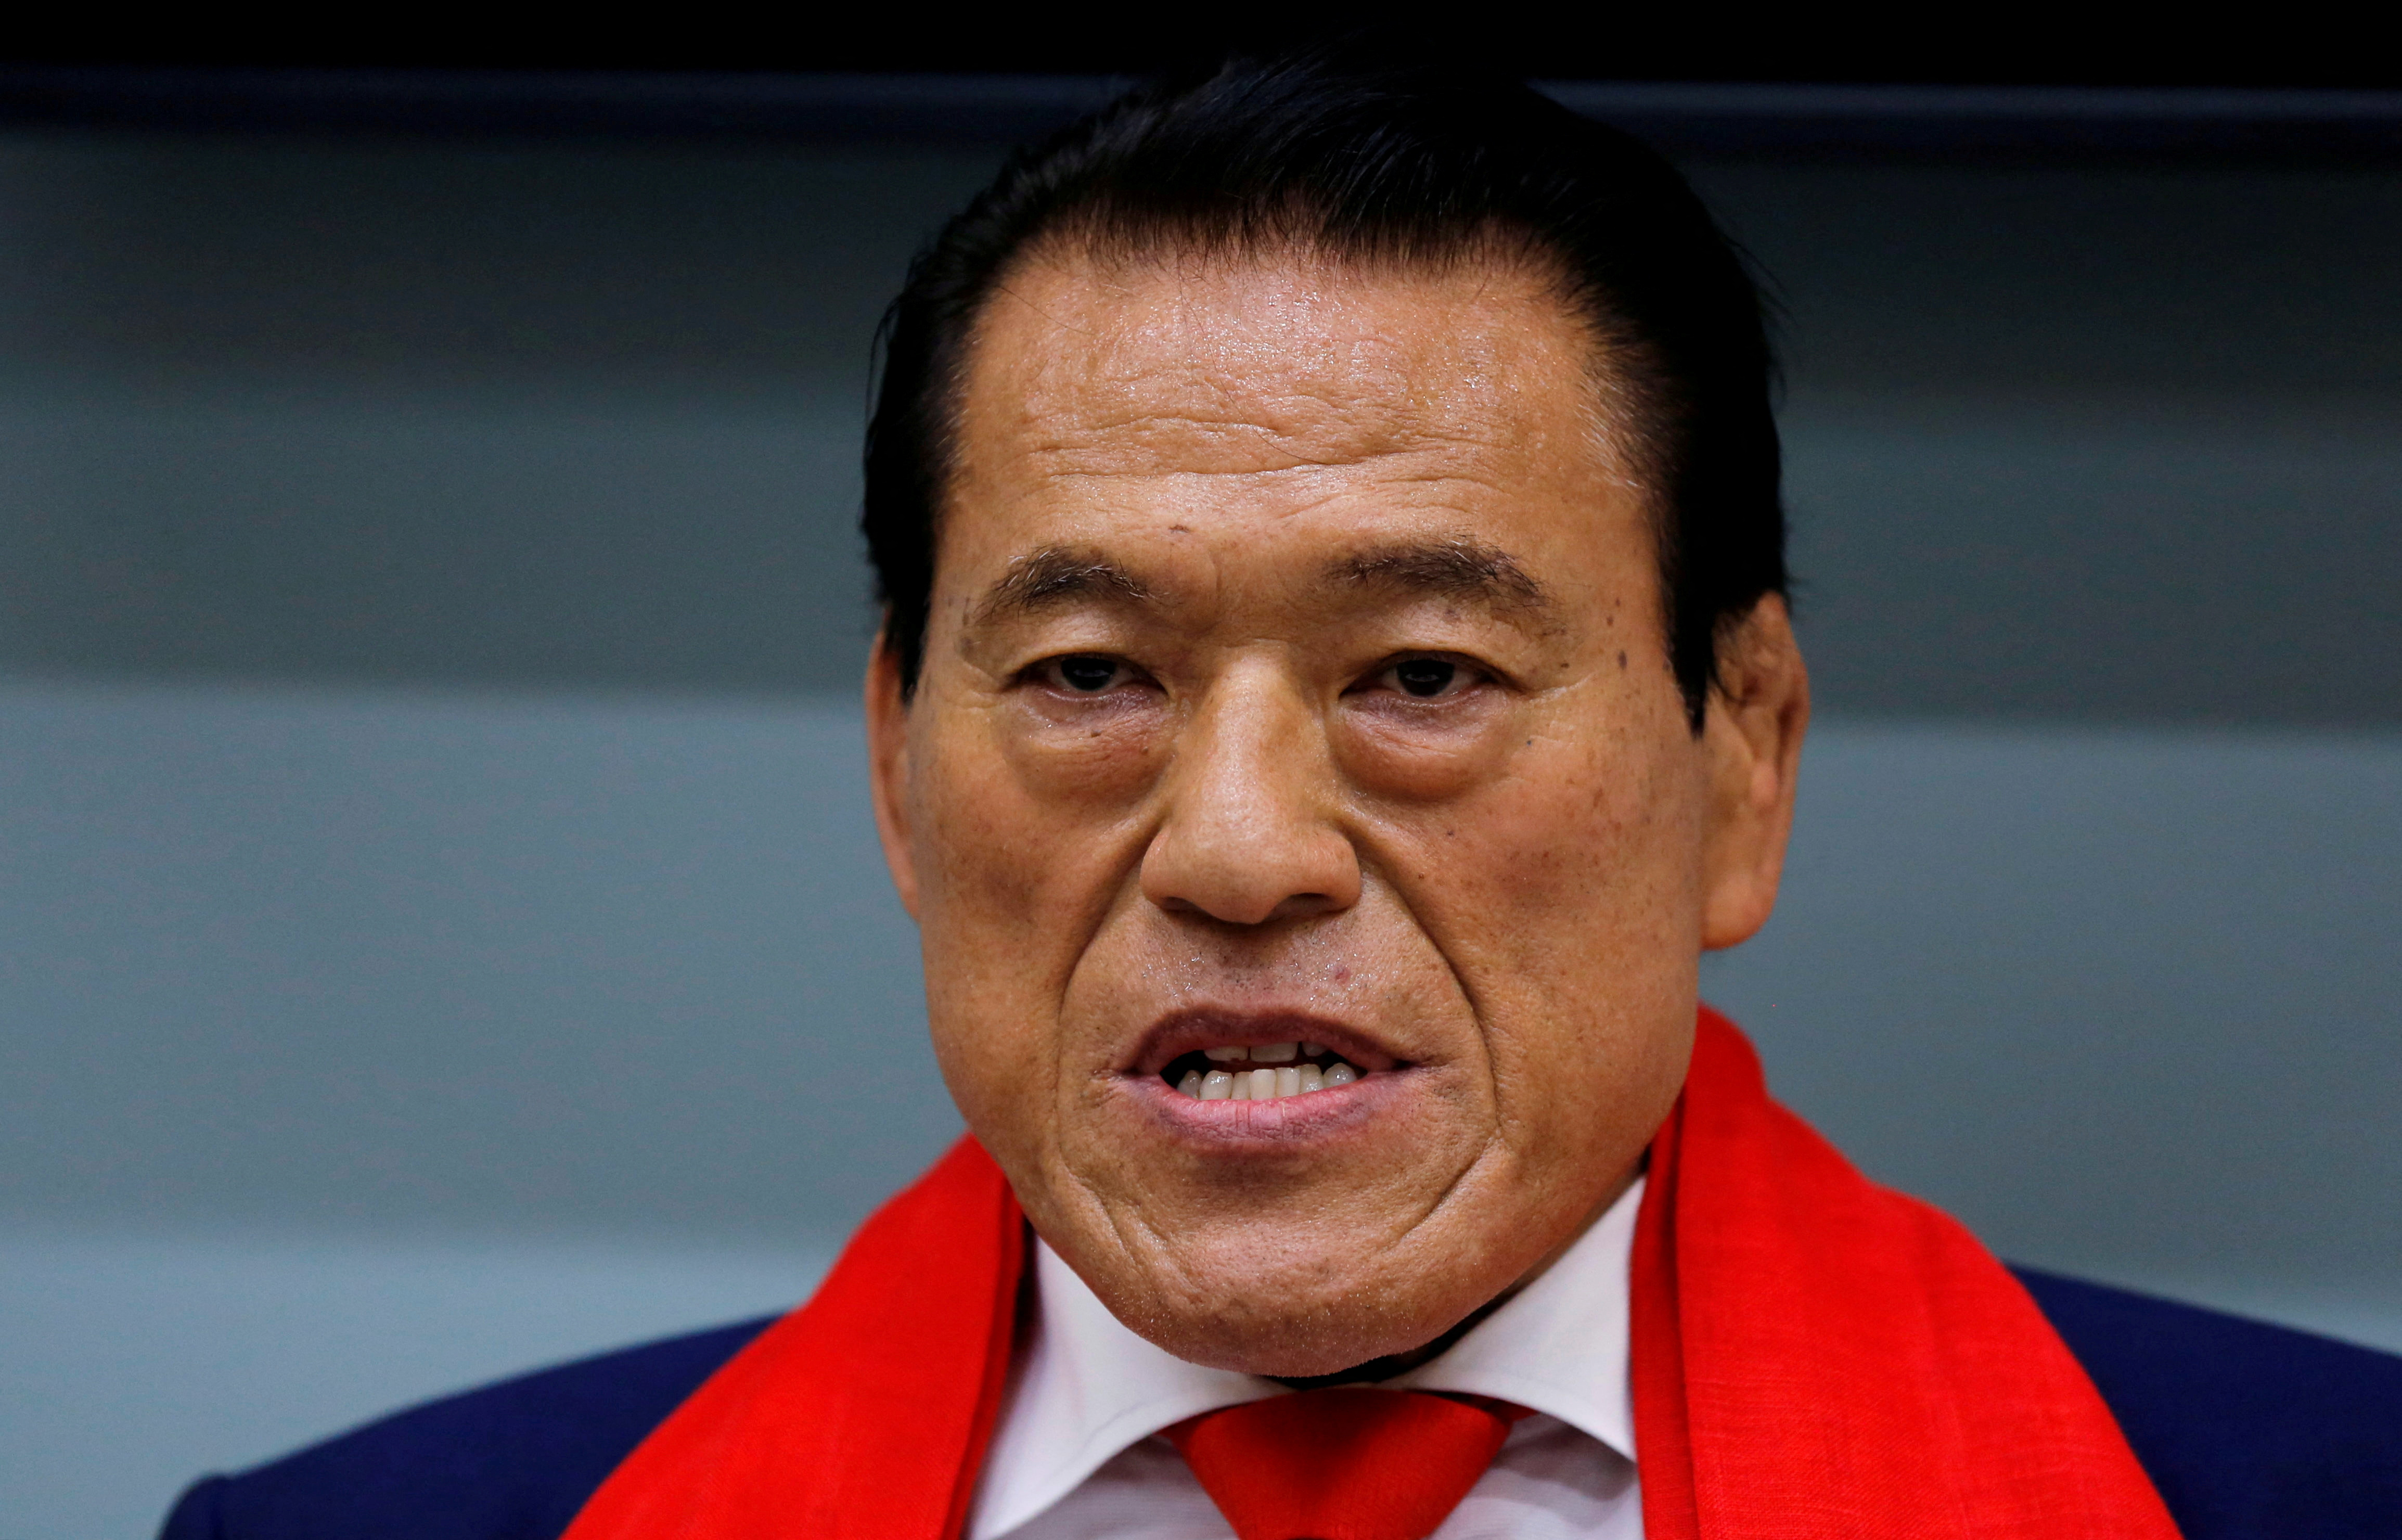 Japanese politician and former wrestling star Inoki attends a news conference after his visit to Pyongyang, as he arrives at Haneda international airport in Tokyo